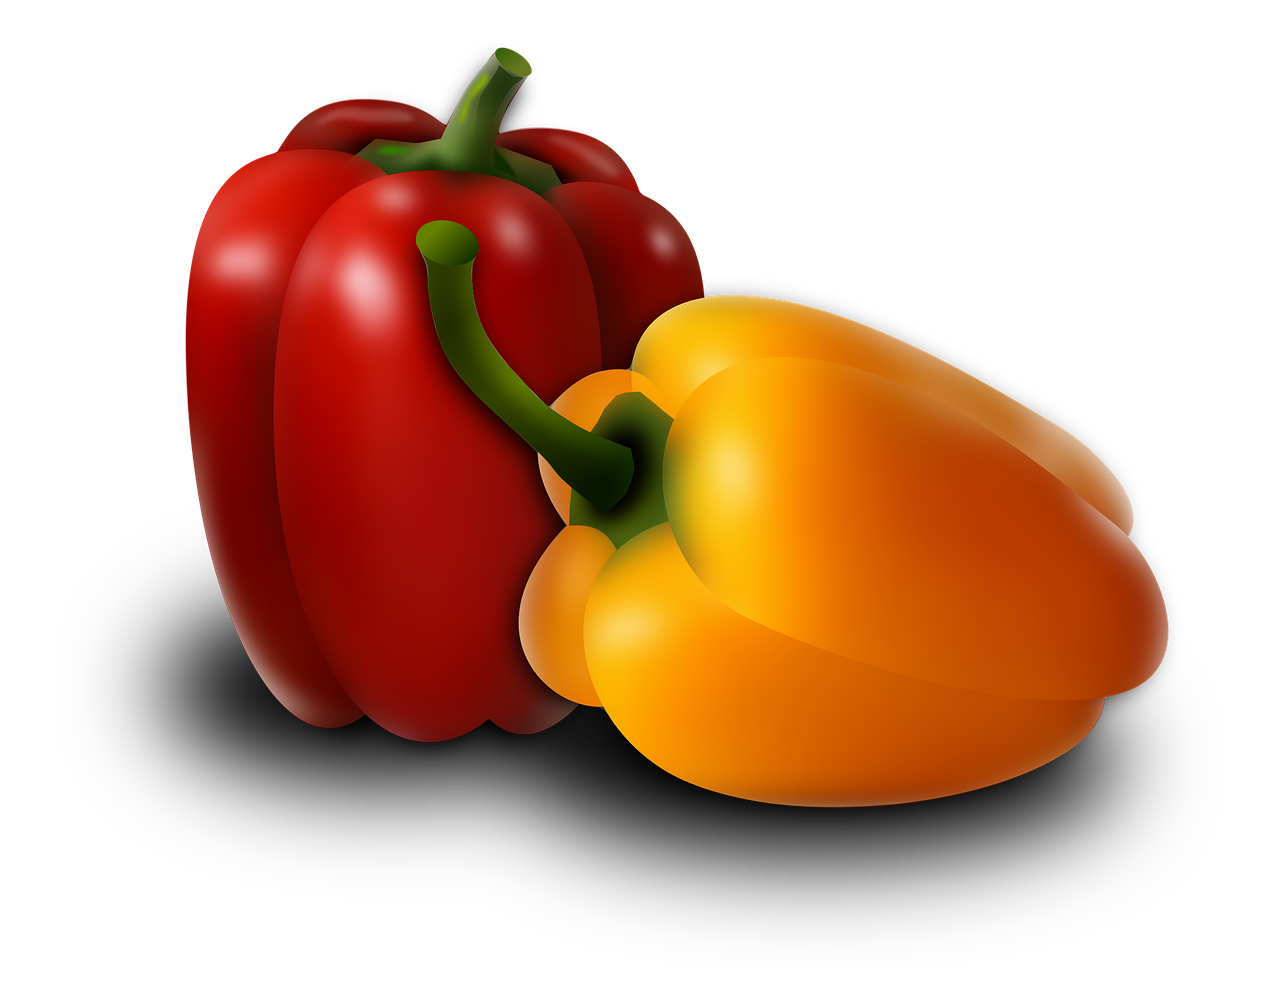 pimento peppers vegetables free photo